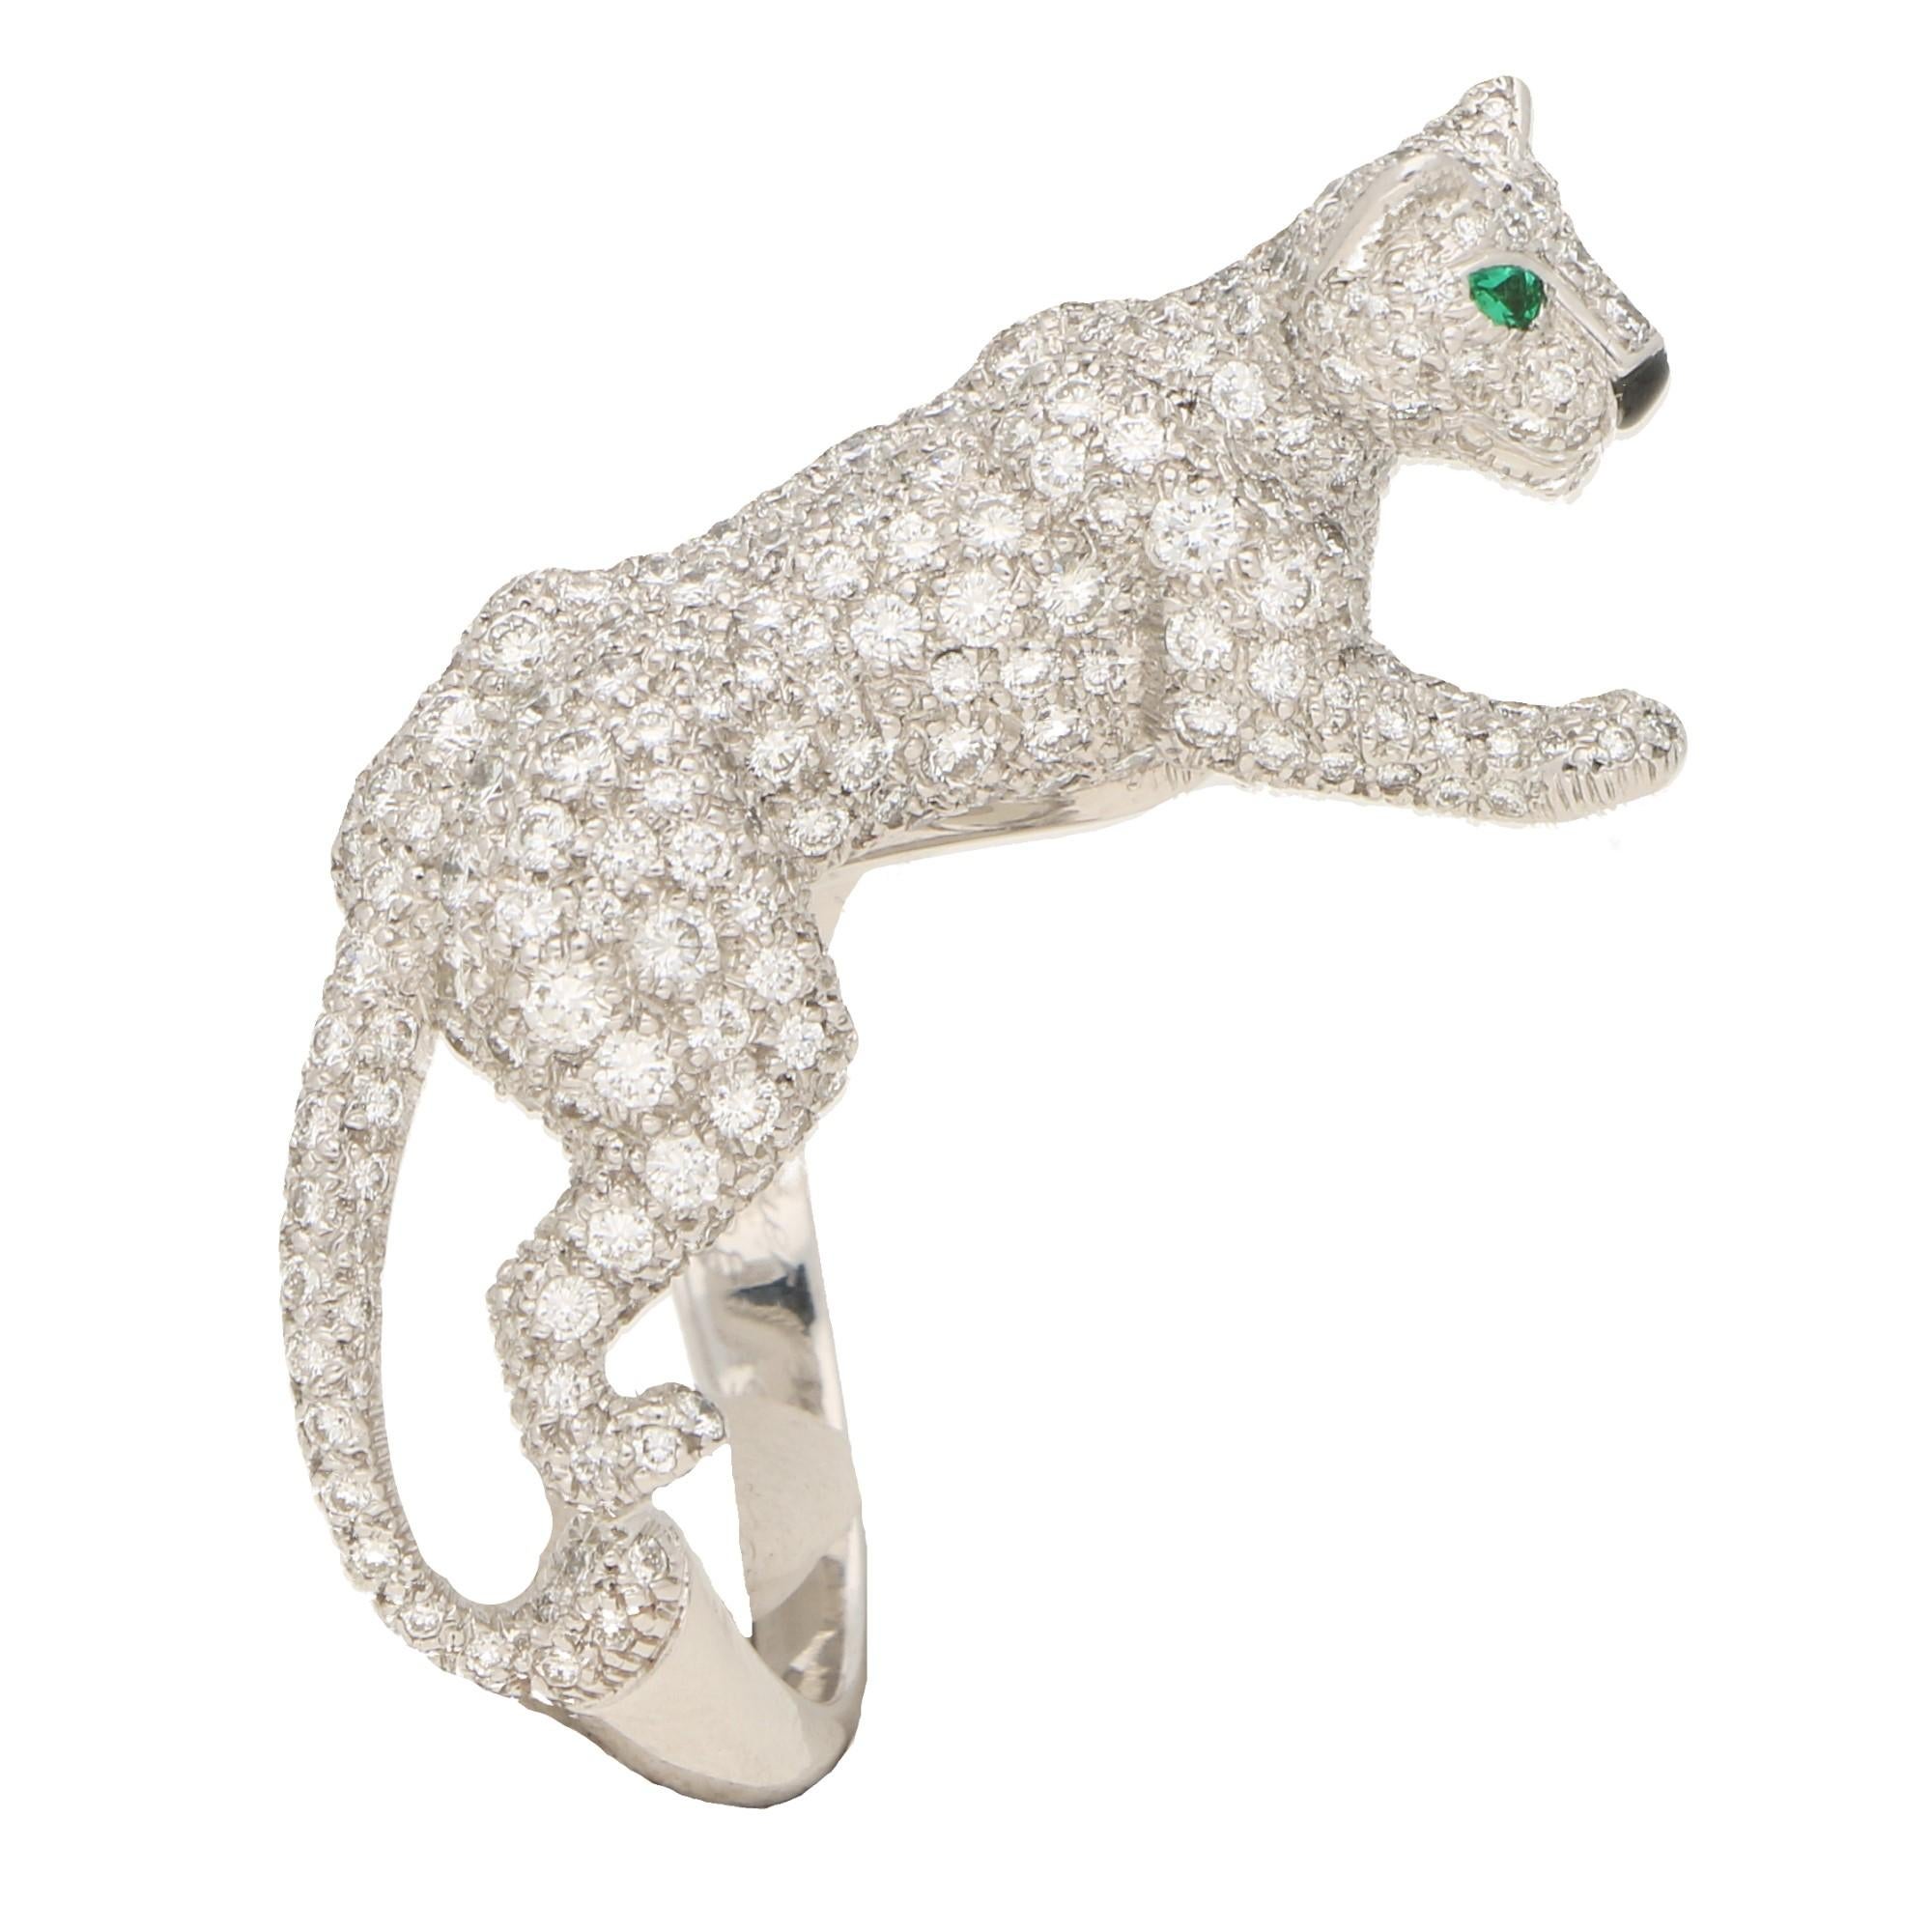 A rare Cartier diamond and green garnet walking panther ring, from the 'Panthère de Cartier' collection, set in 18 karat white gold. 

In the brand's iconic panther motif, this ring depicts a walking panther, stylized so that it appears to be